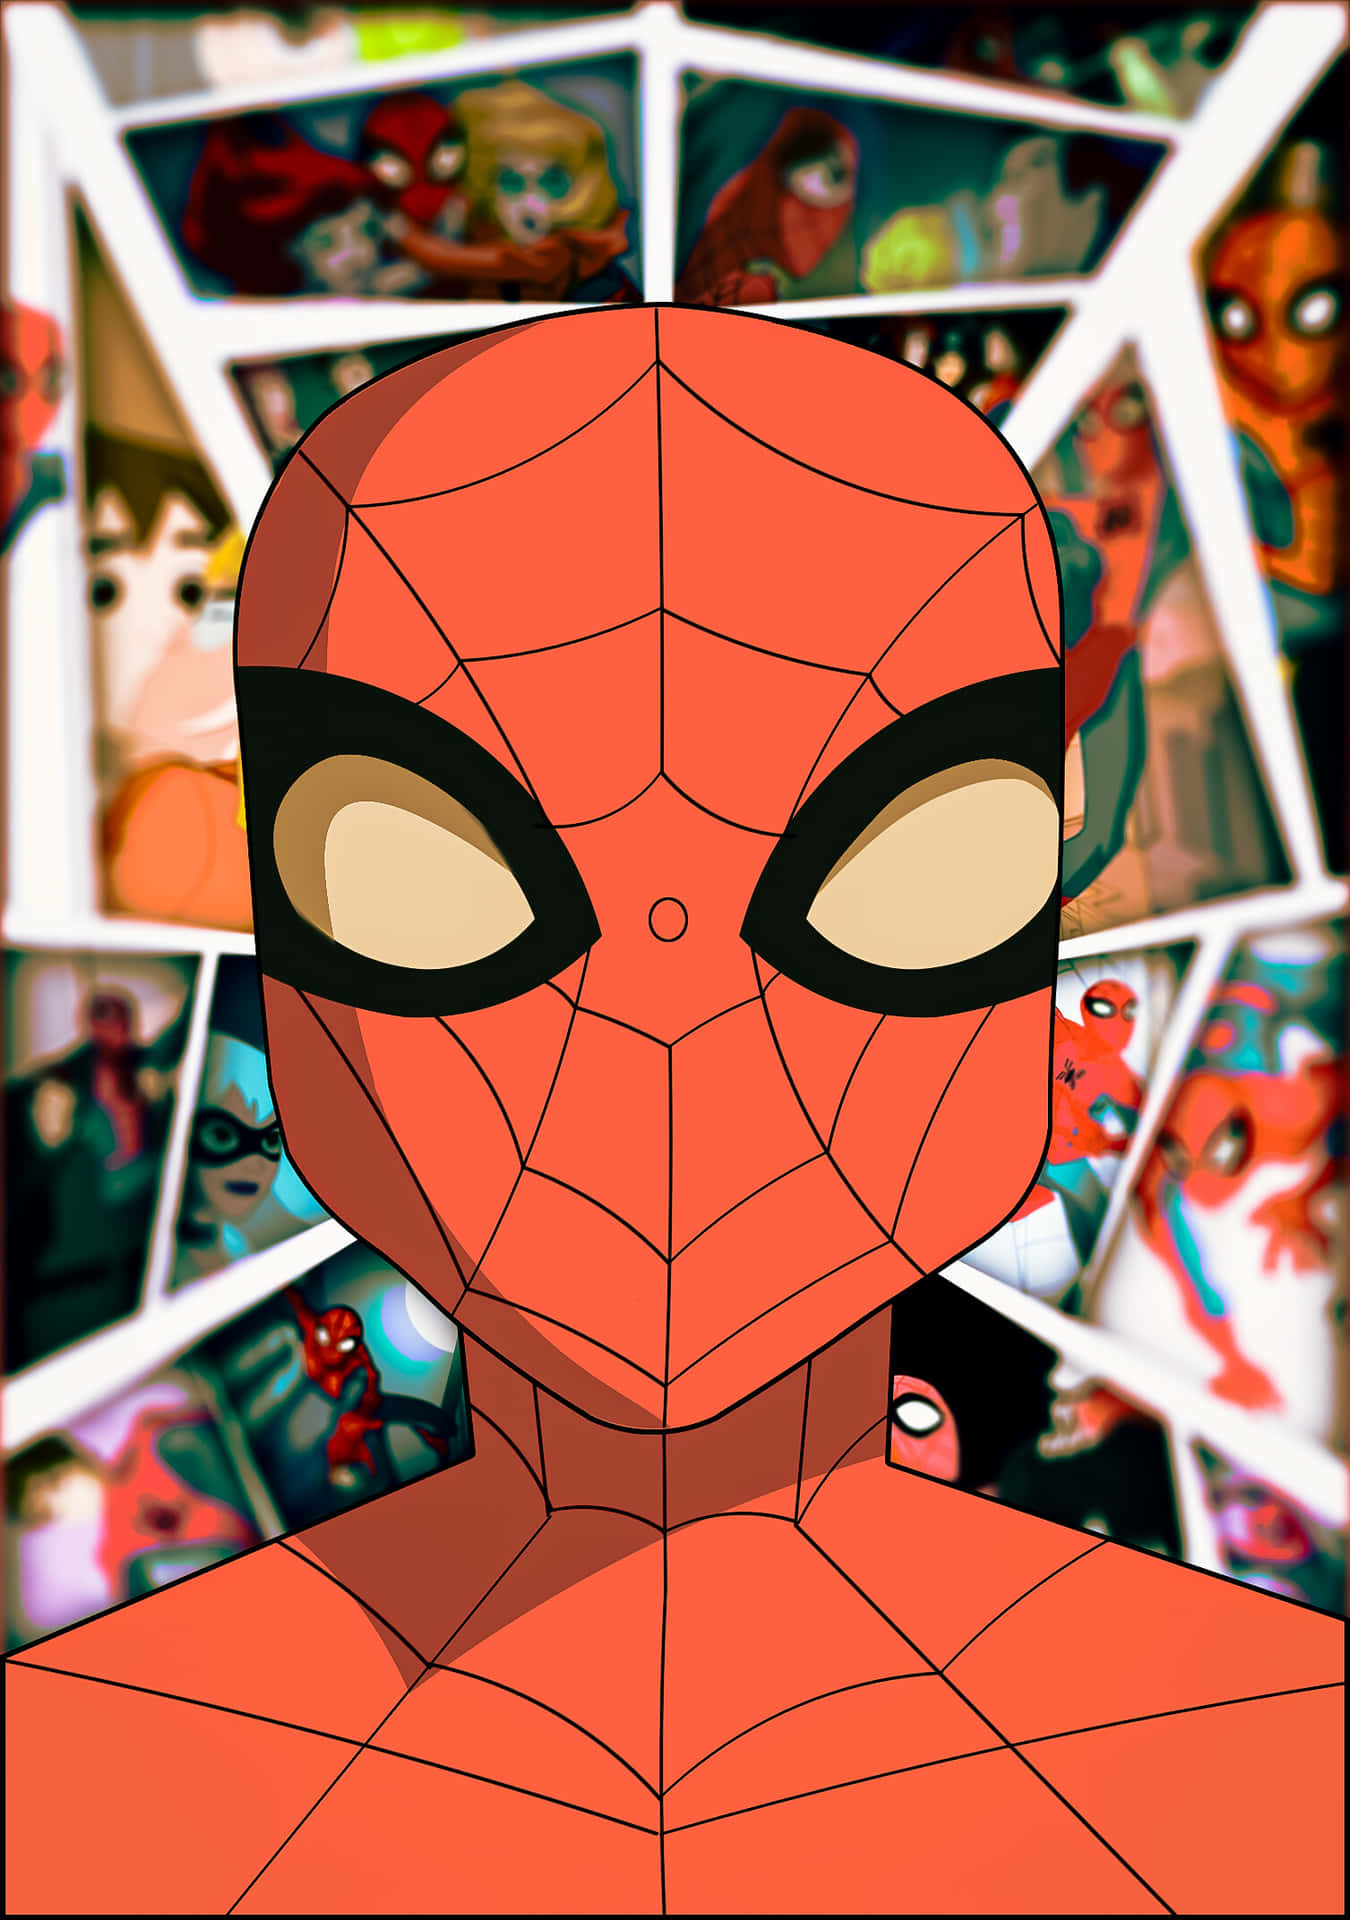 The spectacular spider man HD wallpapers  Pxfuel